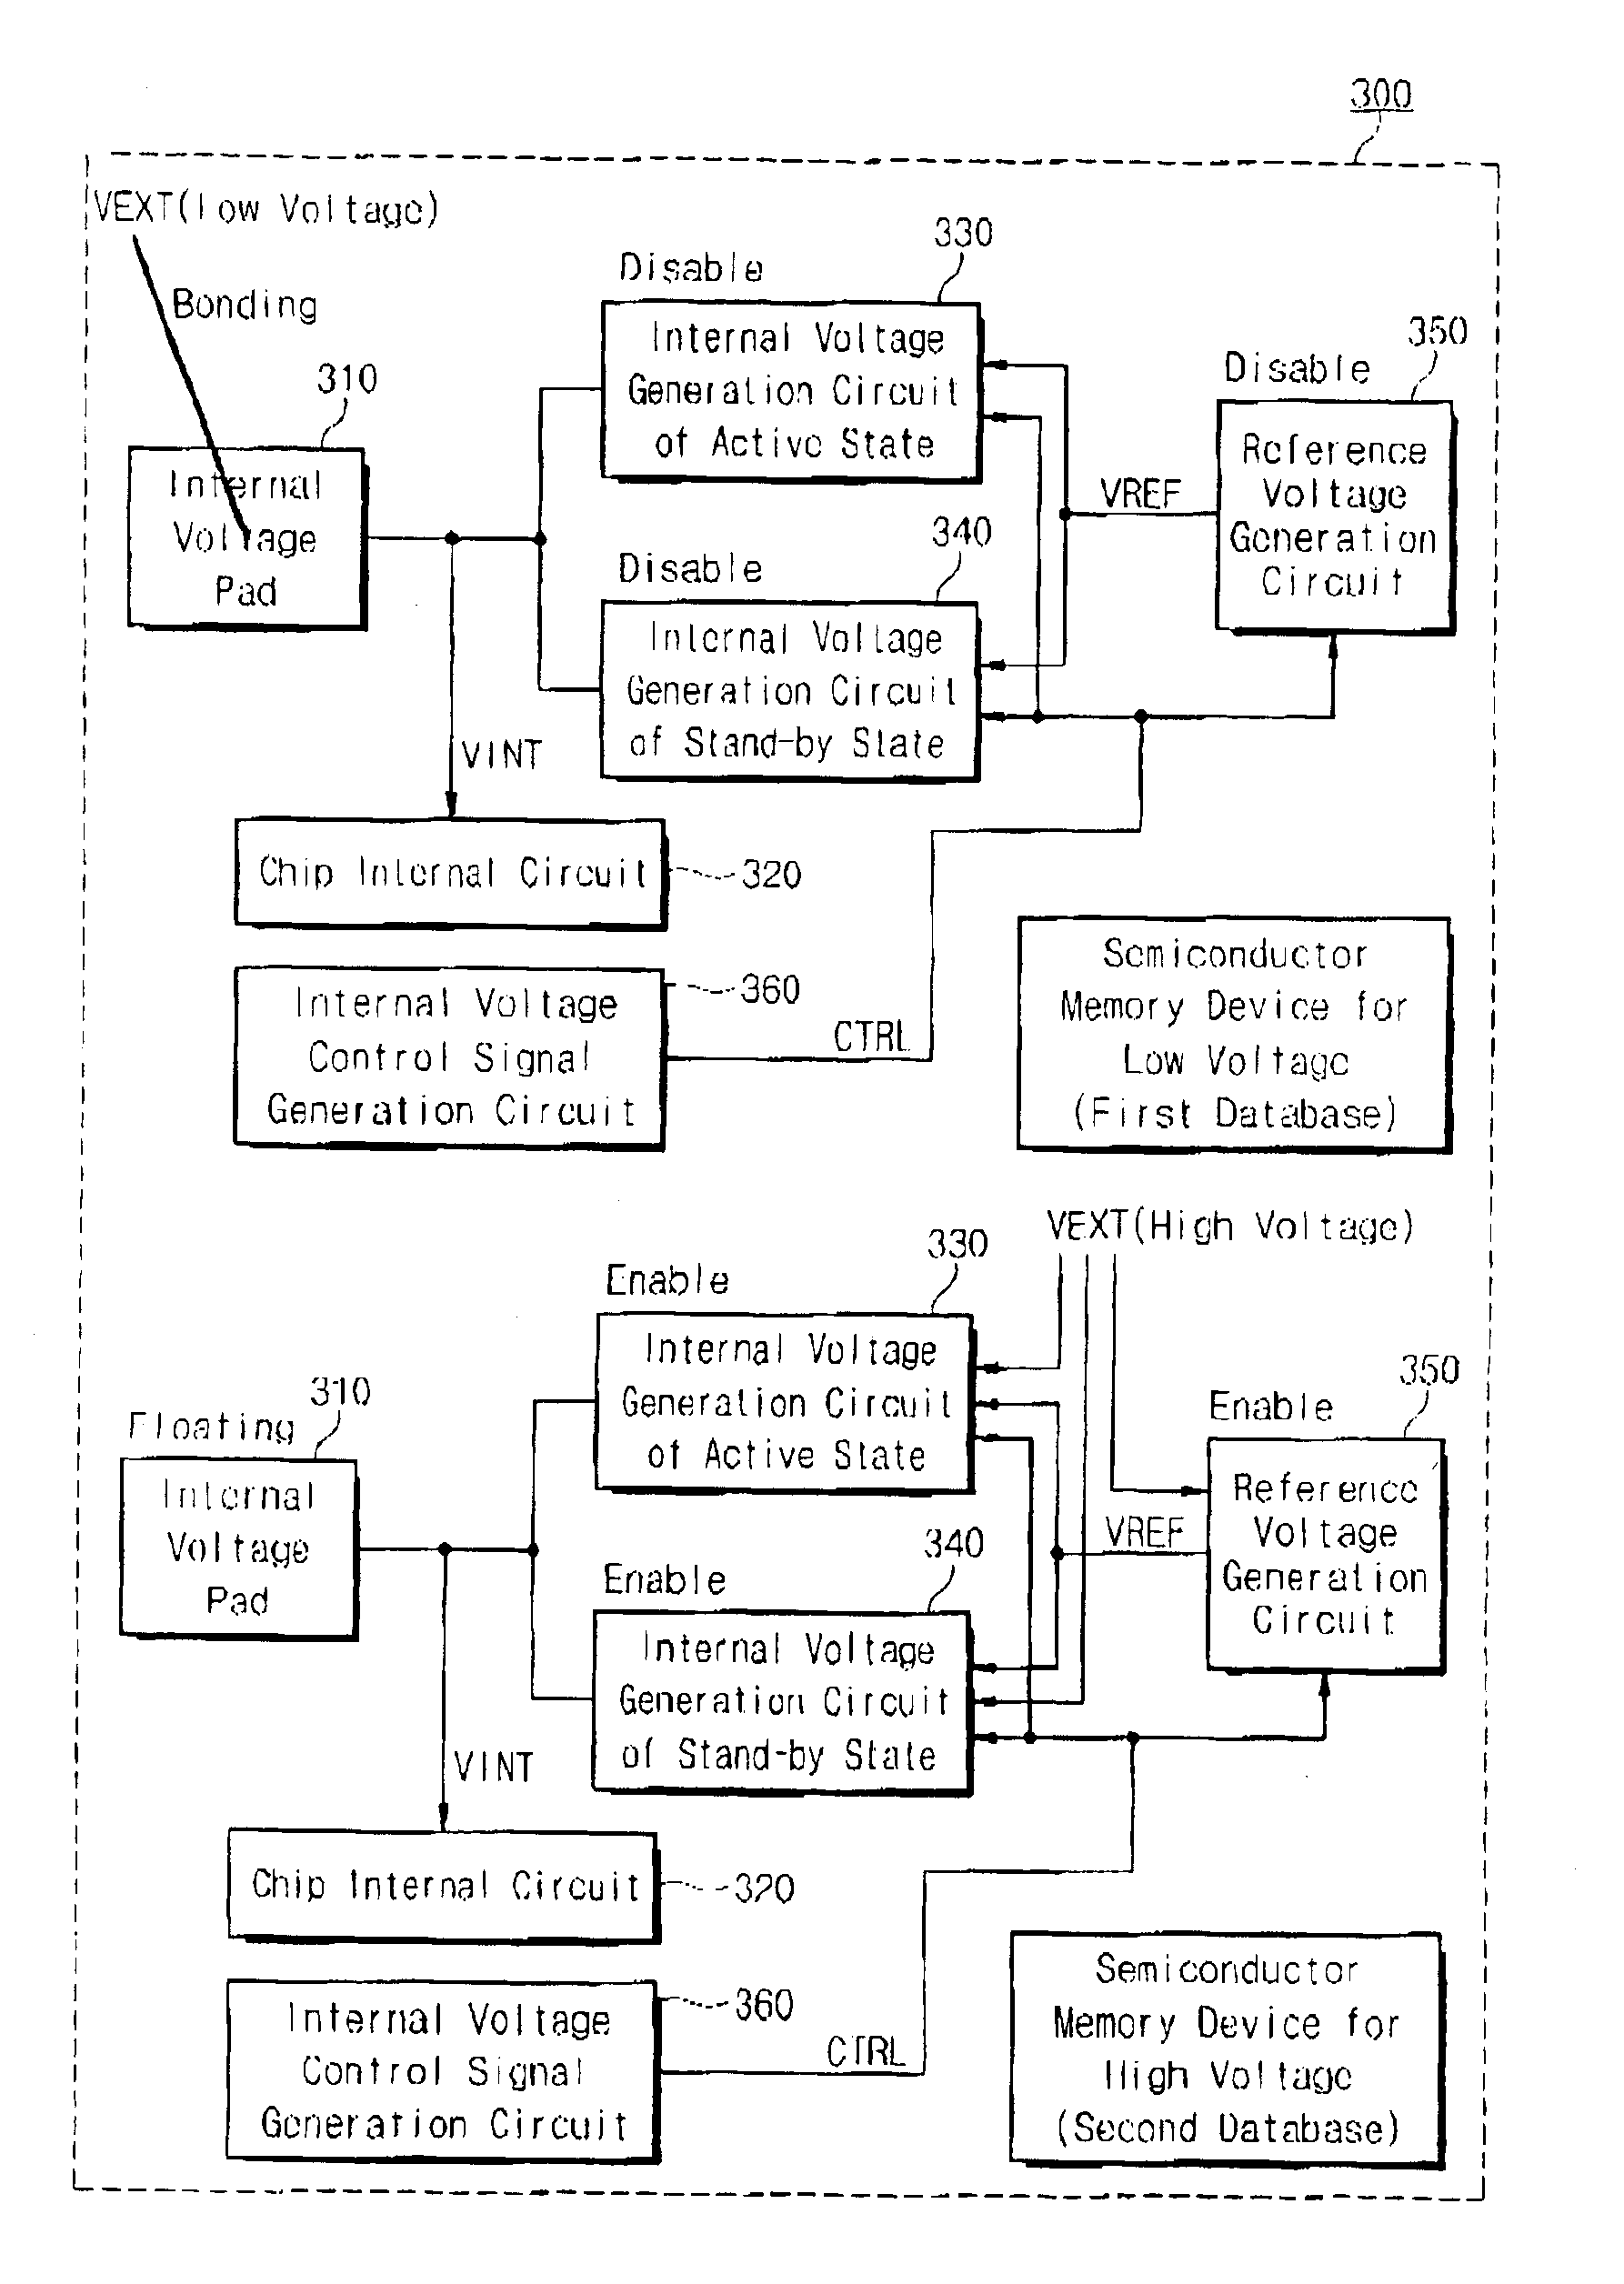 Semiconductor memory device having an internal voltage generation circuit for selectively generating an internal voltage according to an external voltage level